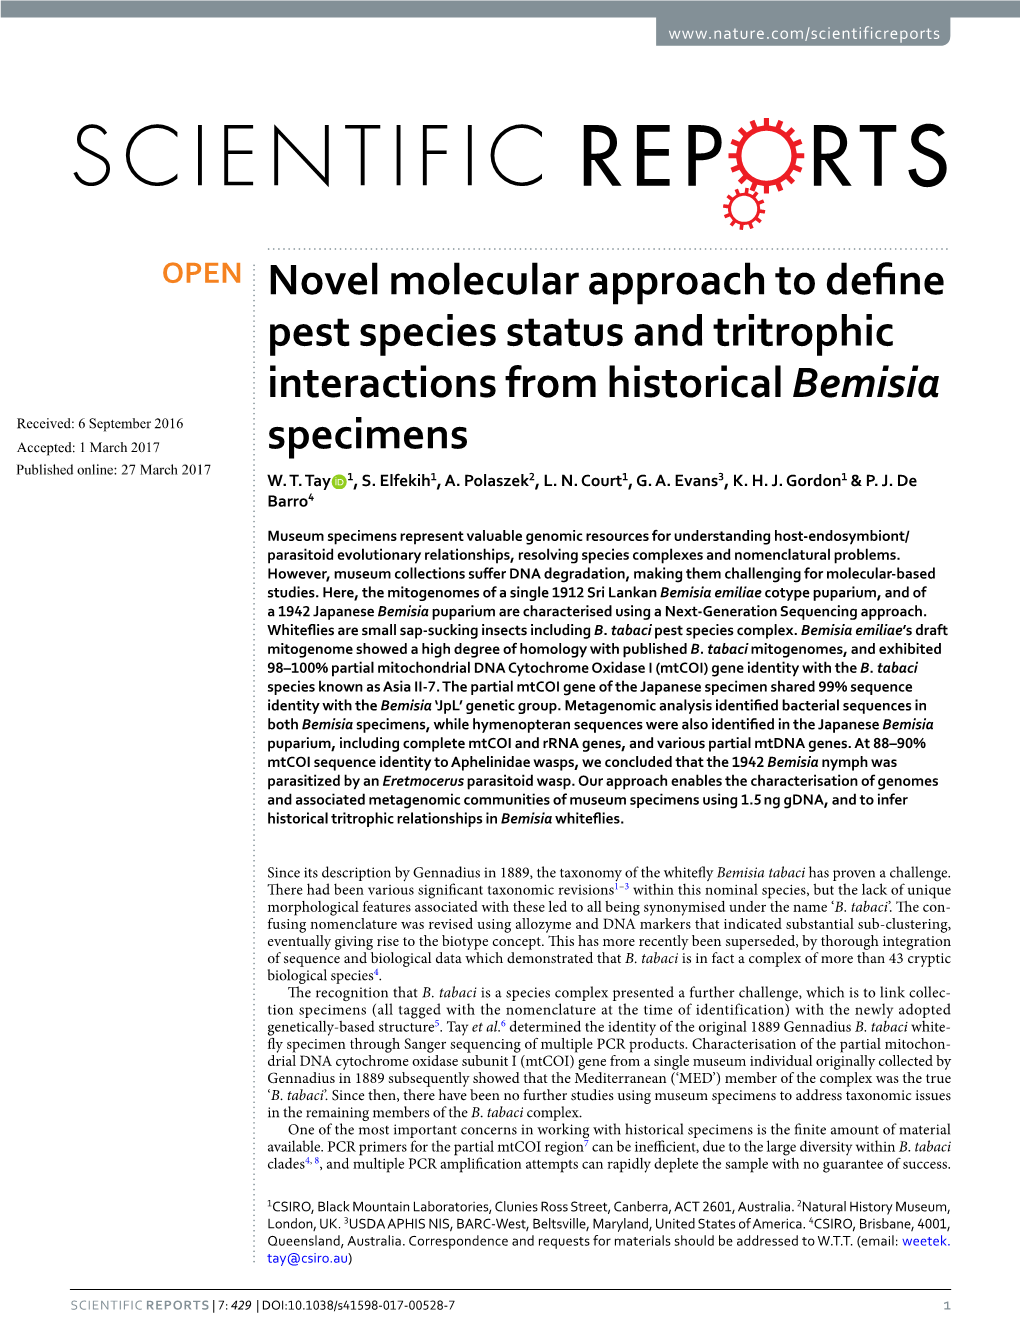 Novel Molecular Approach to Define Pest Species Status and Tritrophic